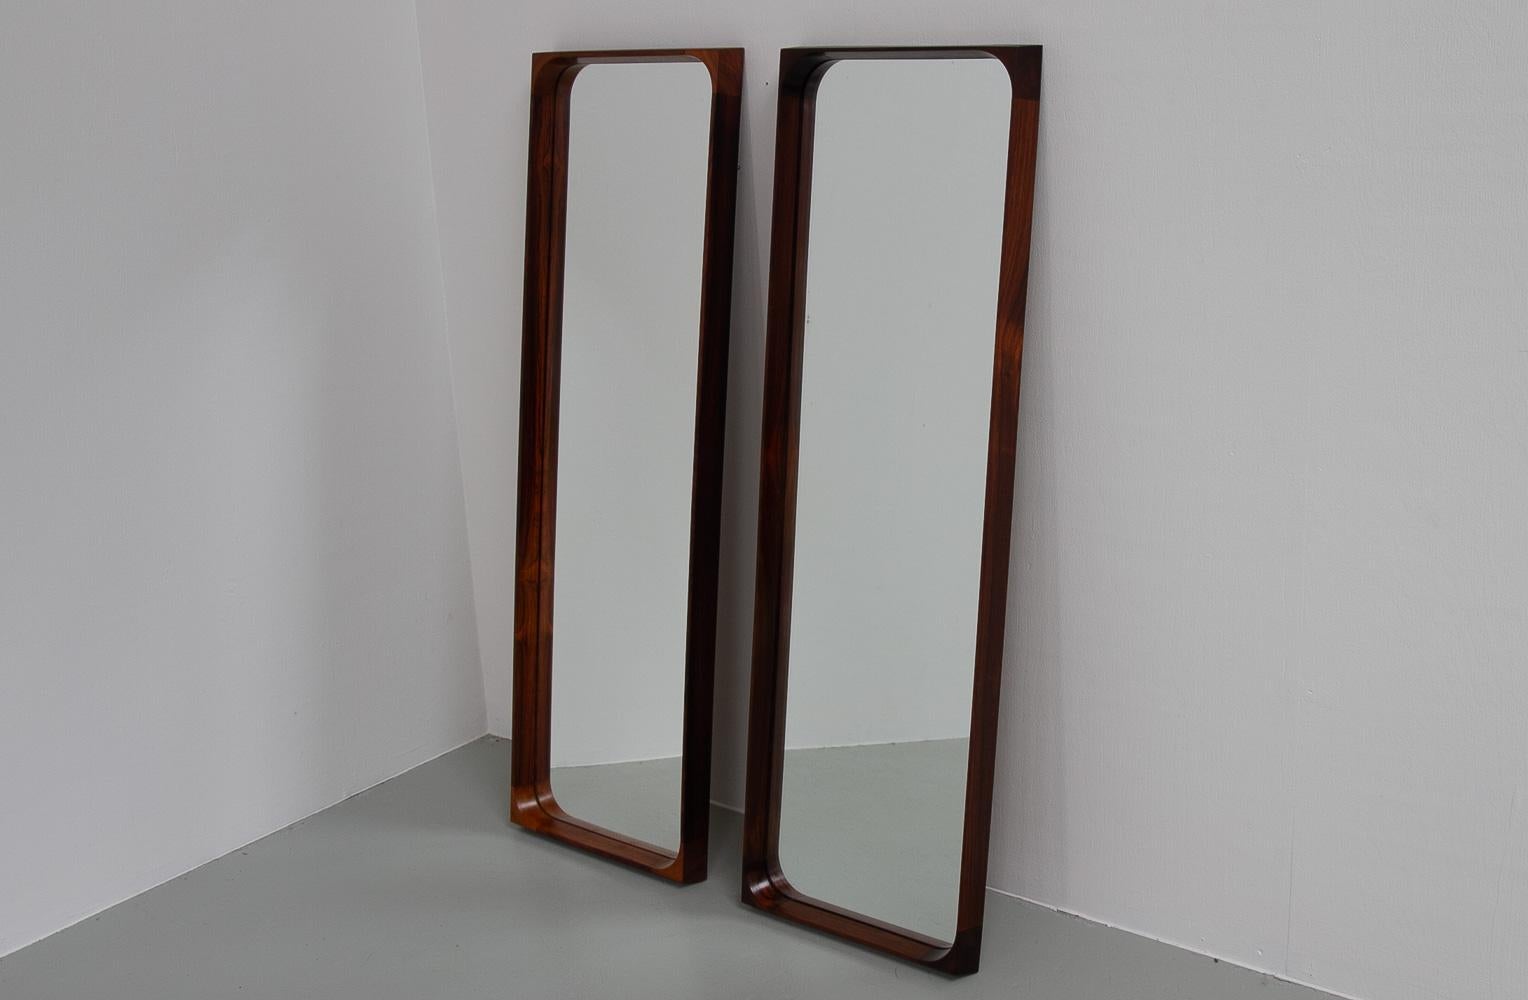 Danish Modern Rosewood Mirrors by Niels Clausen for NC Møbler, 1960s. Set of 2.
Pair of large Rosewood/Palisander wall mirrors designed by Danish master carpenter Niels Clausen for N.C. Møbler, Odense, Denmark. 
Frame in solid Rosewood with rounded